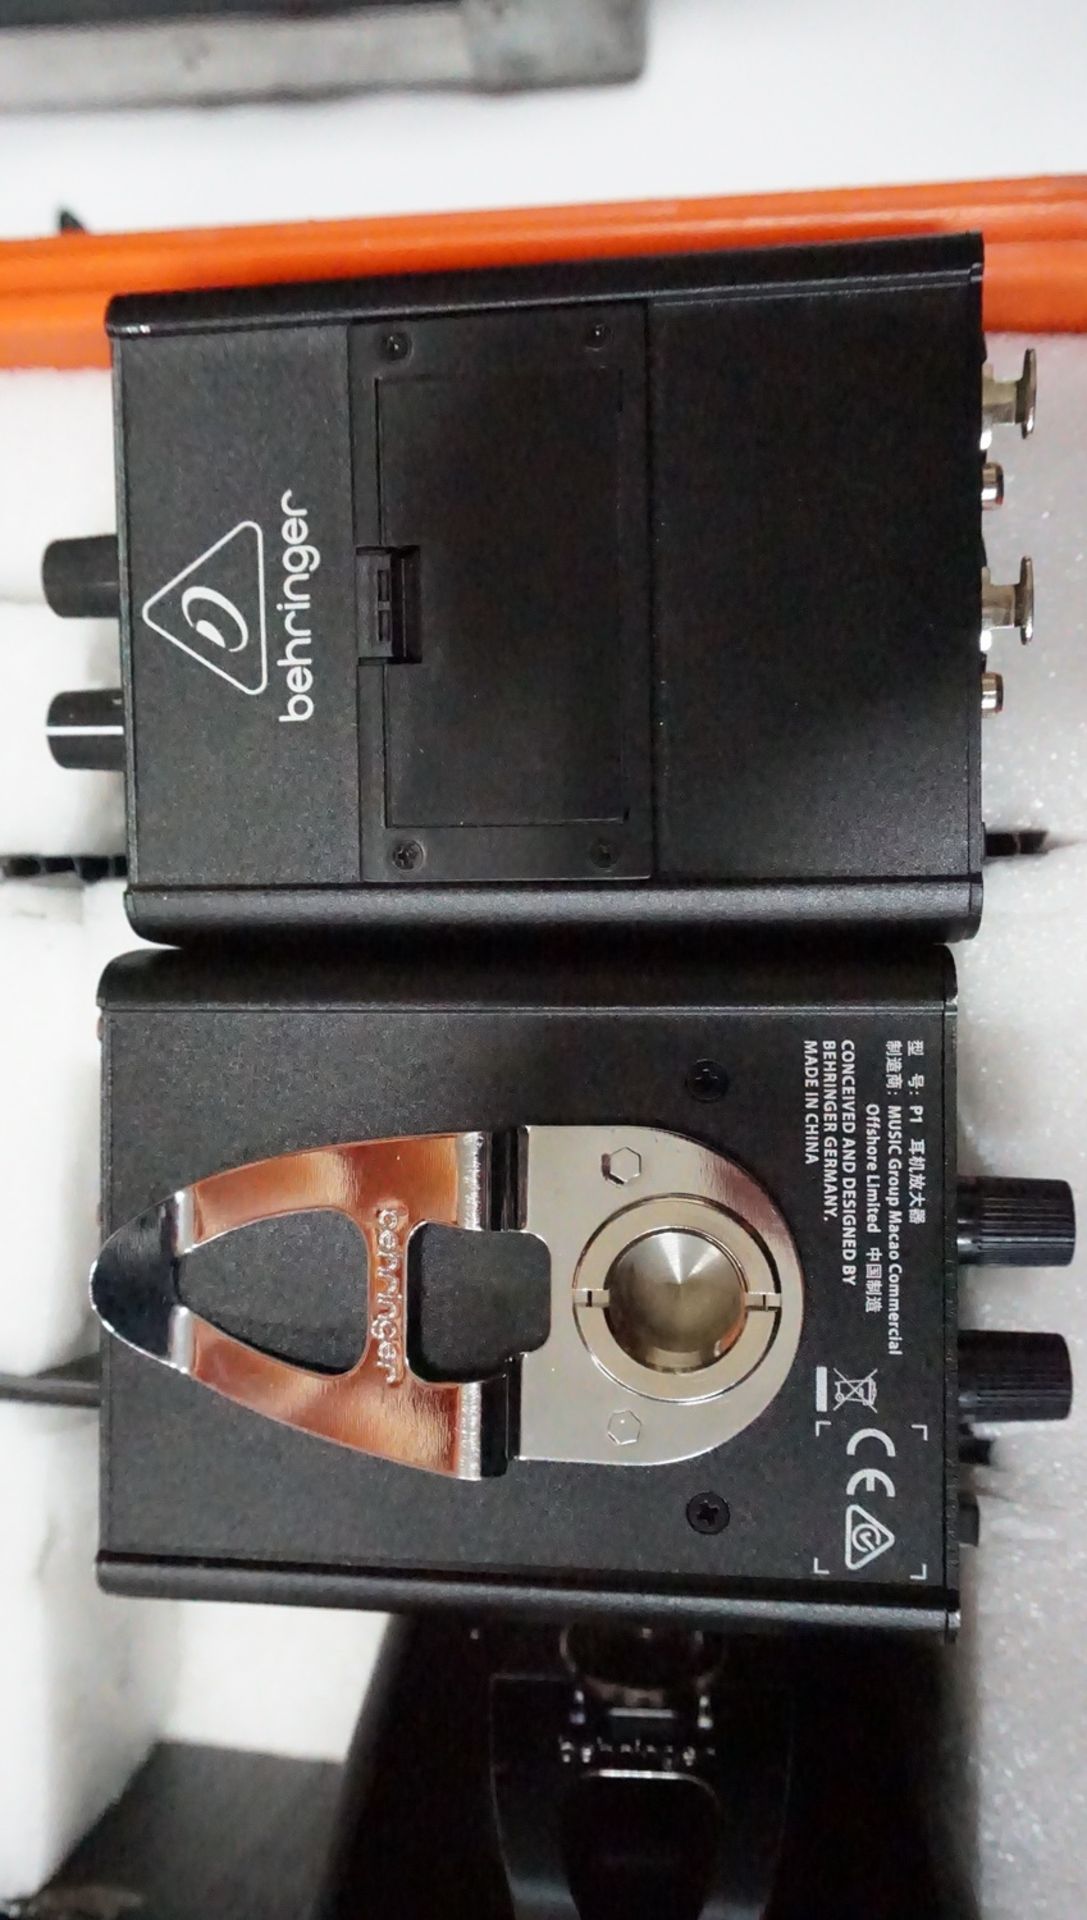 UNITS - BEHRINGER POWERPLAY P1 PERSONAL WIRED IN-EAR MONITOR AMPLIFIERS W/ POWER SUPPLIES IN CASE - Image 3 of 3